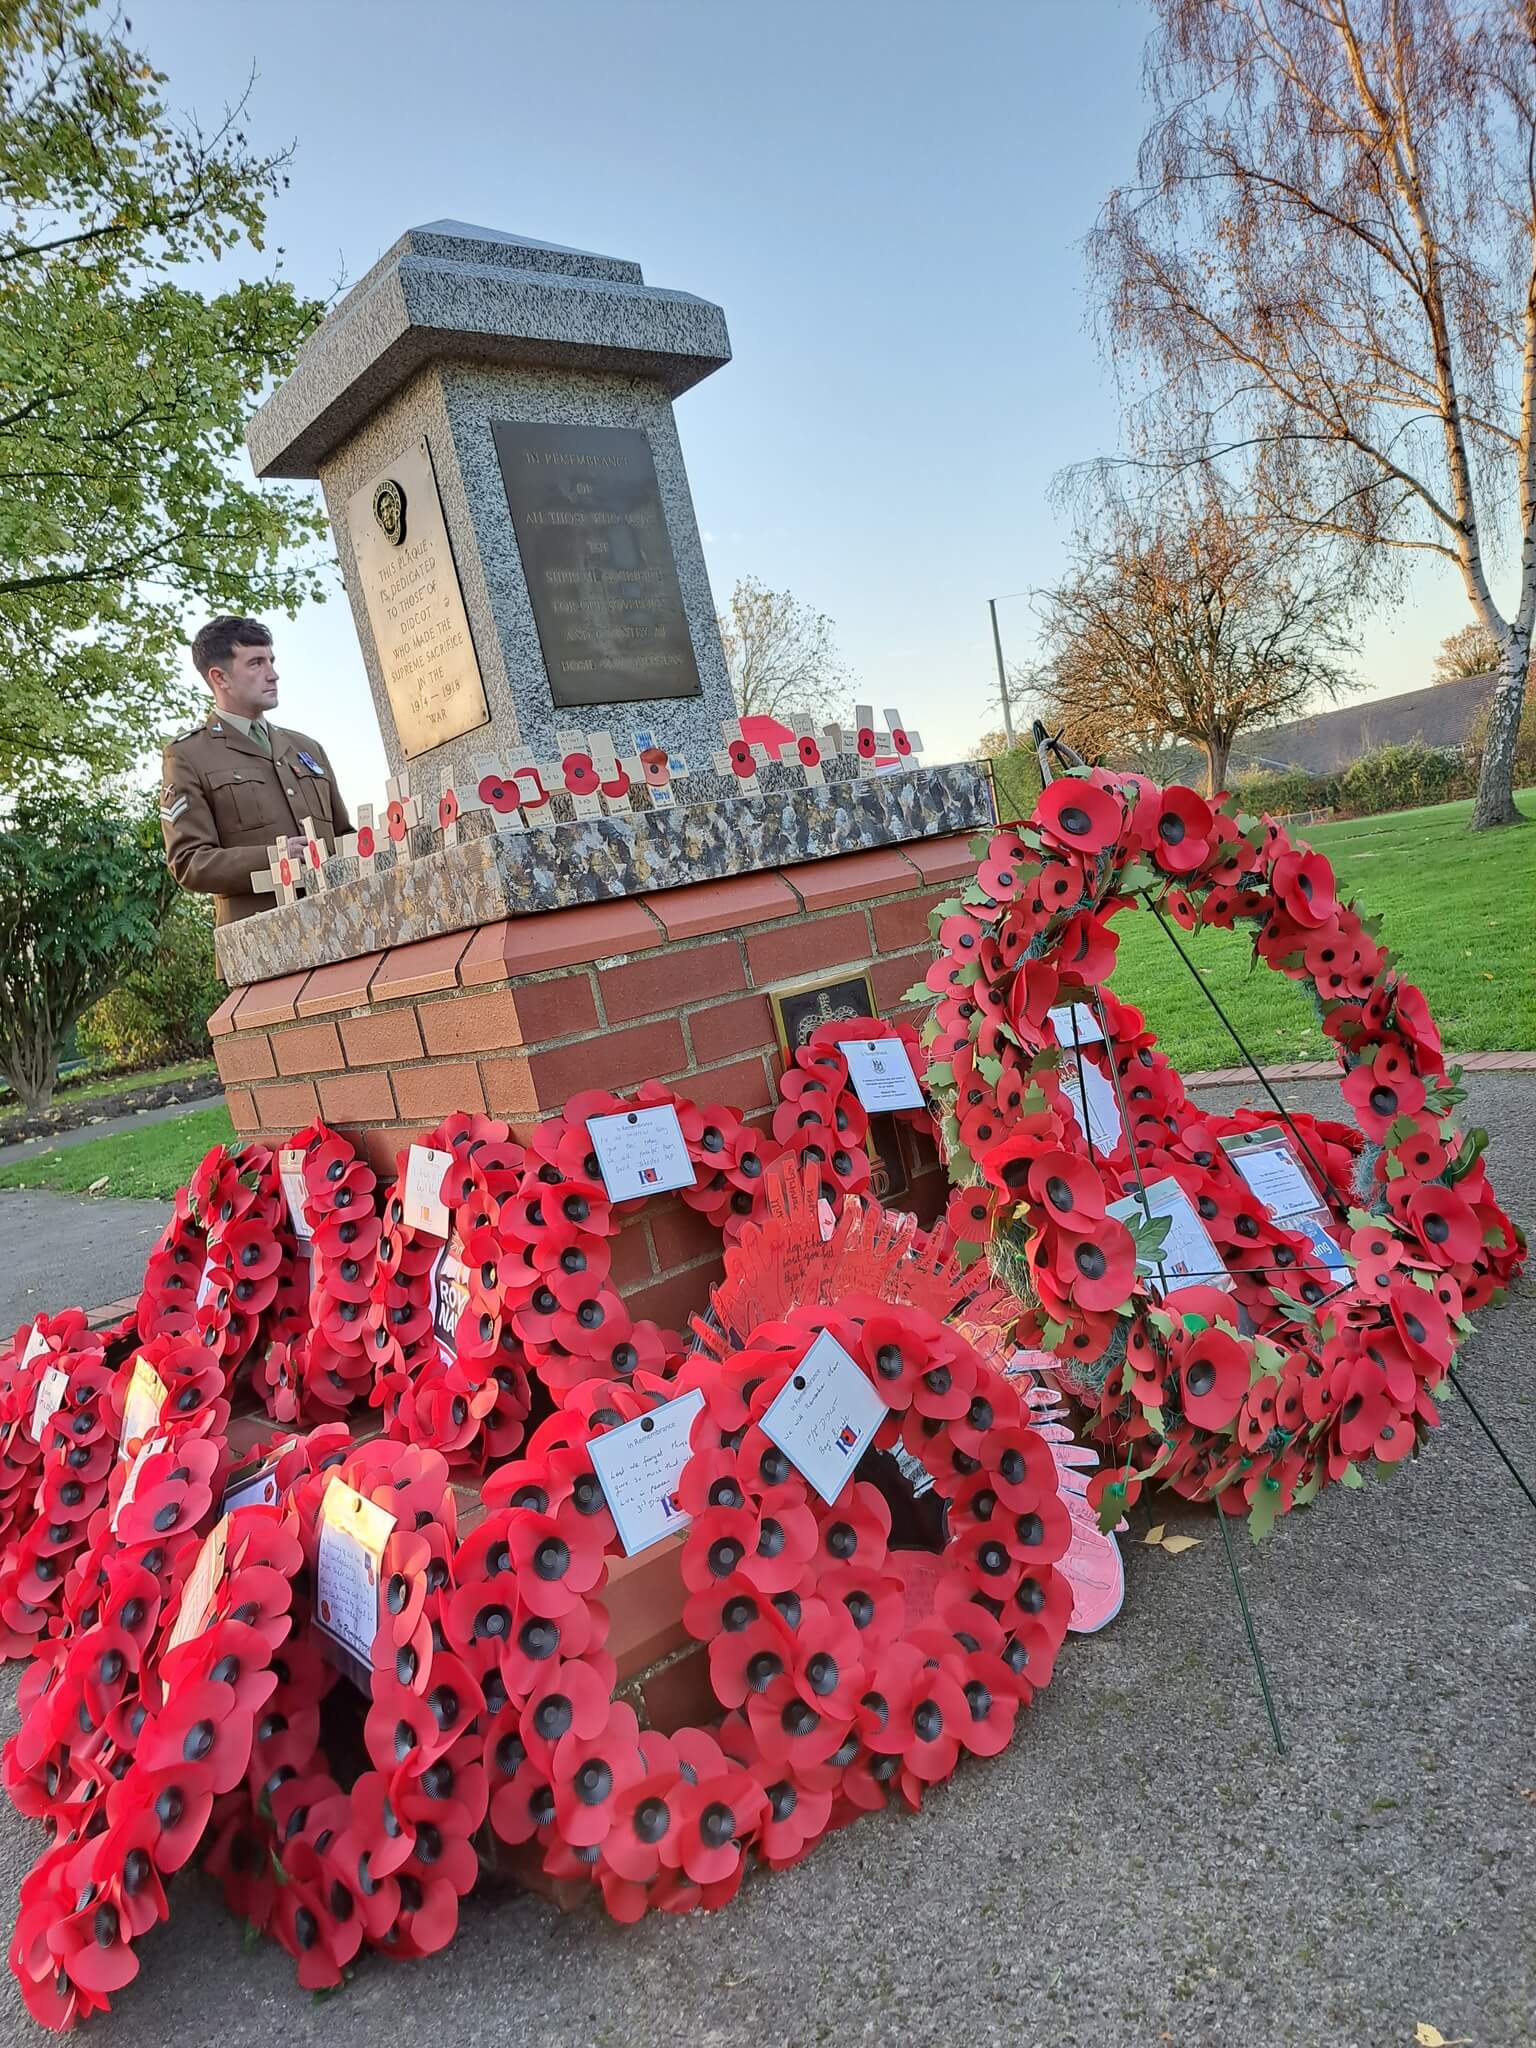 Wreaths laid for remembrance day